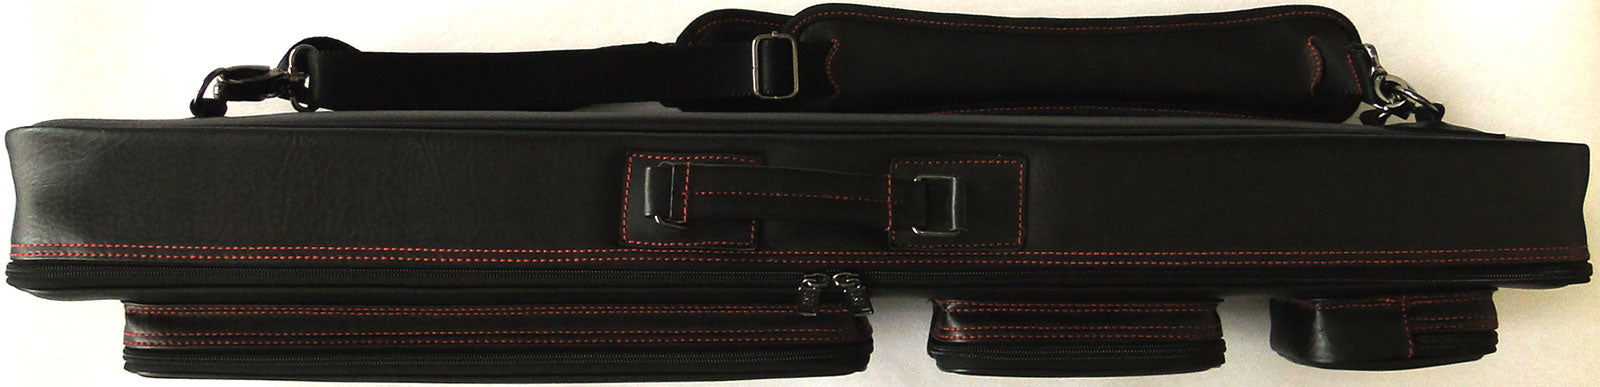 J&J 4x8 Butterfly Soft Sided DOUBLE STRAP Cue Case Pool Cue Case